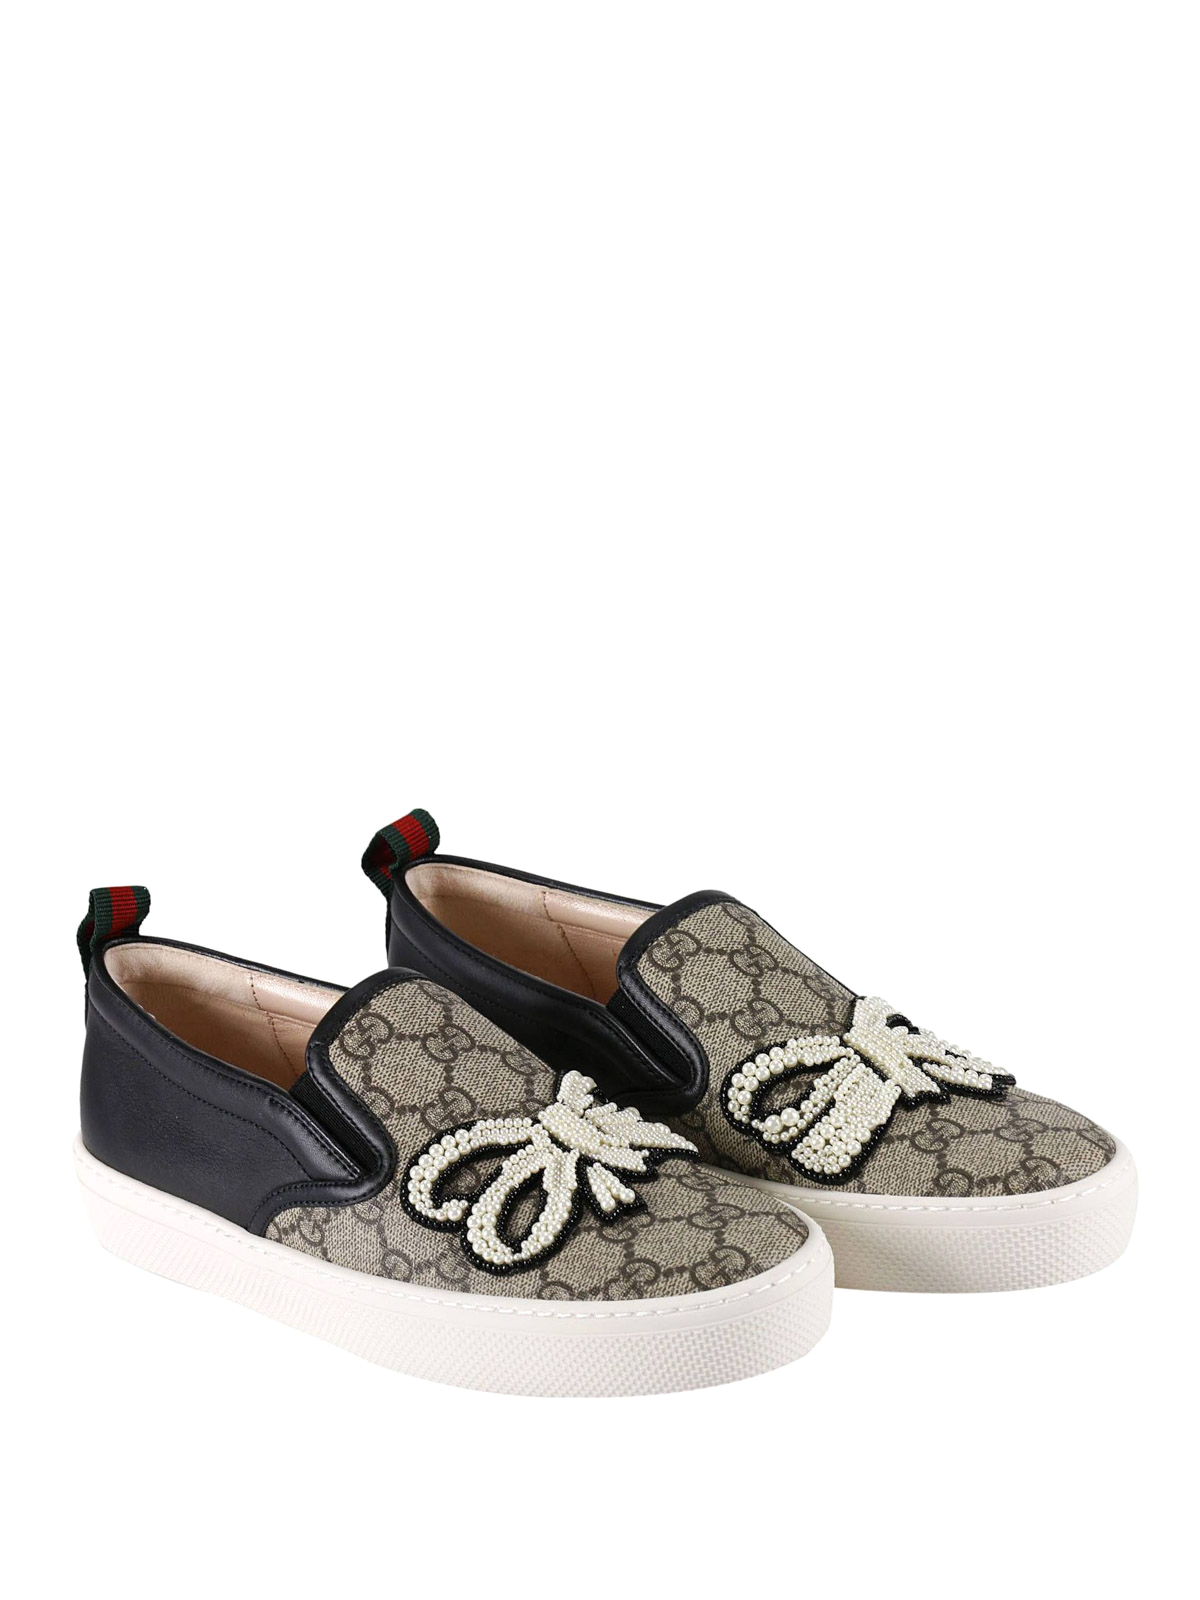 Gucci - GG Supreme slip-ons with pearls 